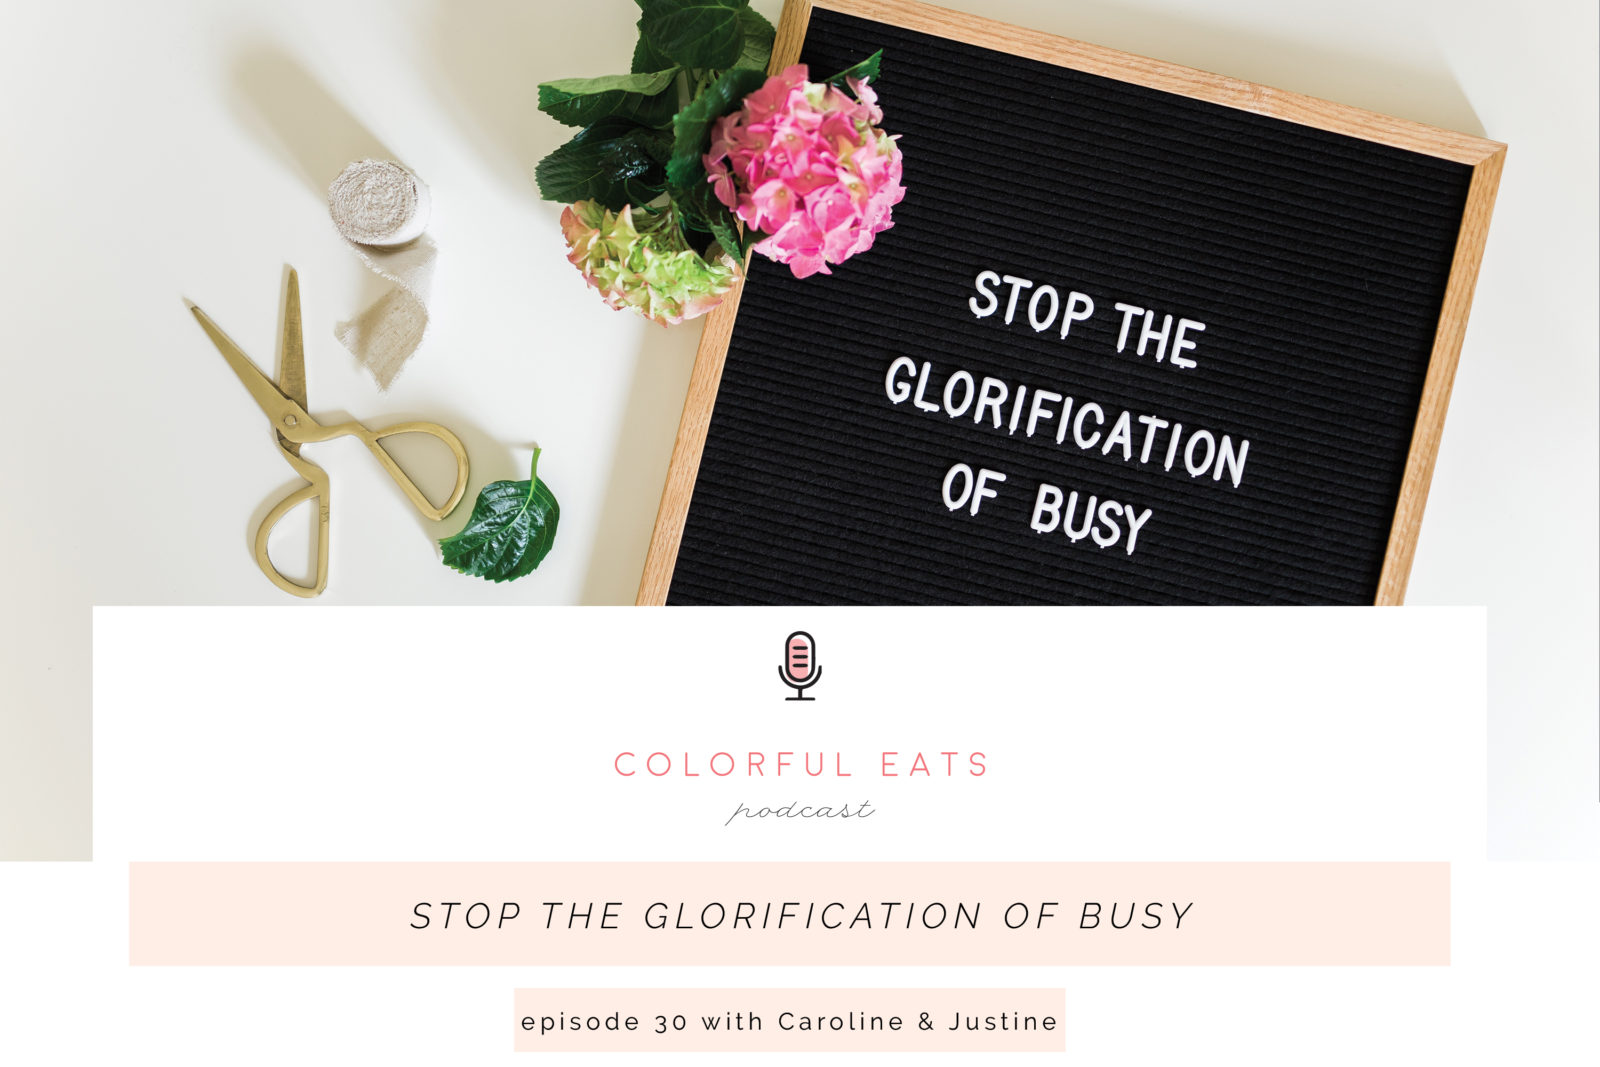 Colorful Eats Podcast Episode 30 Stop the Glorification of Busy